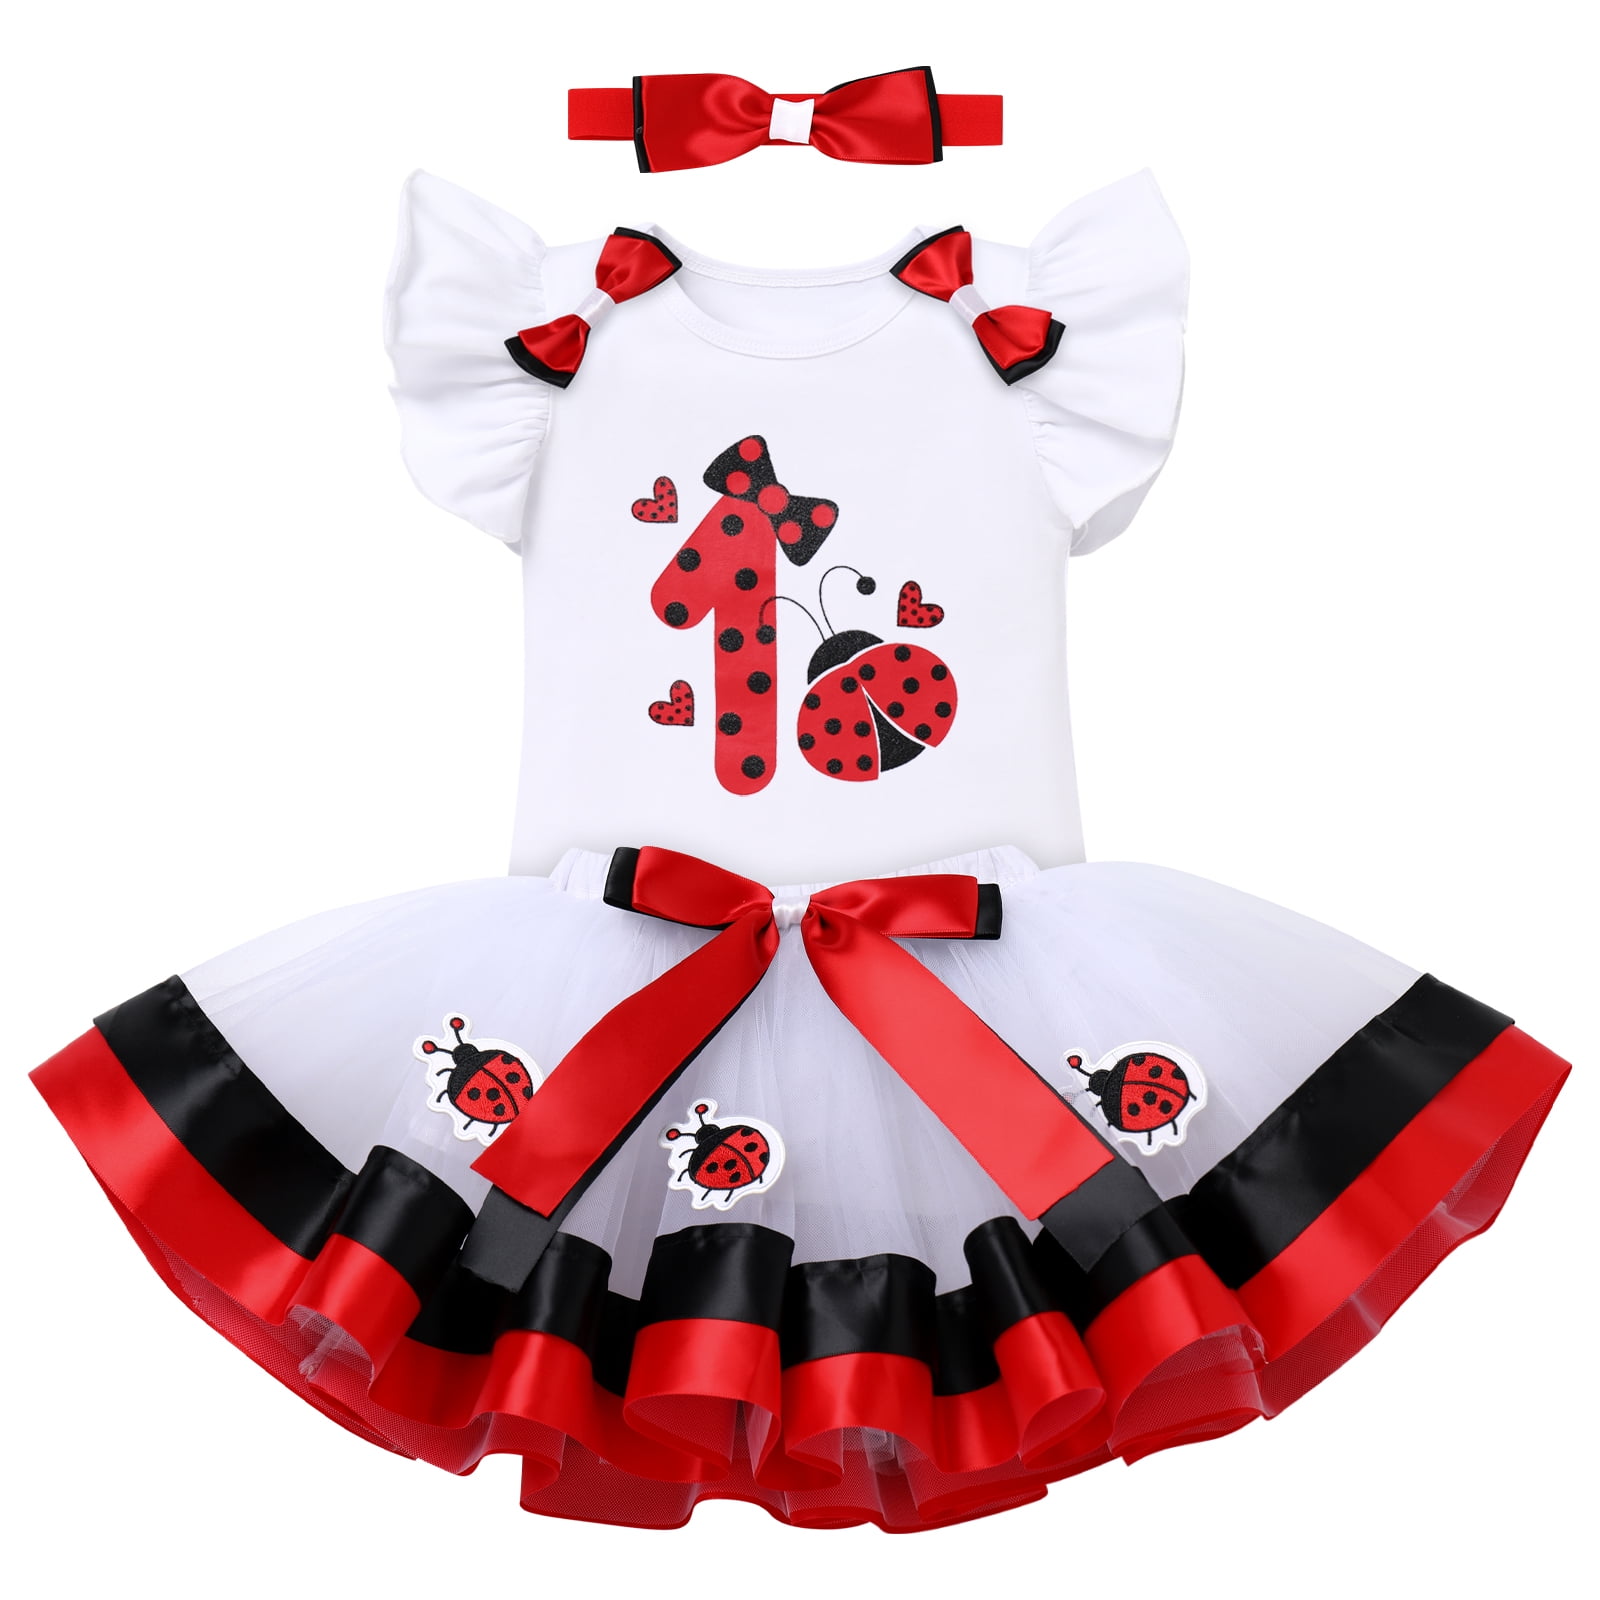 IDOPIP Ladybug Cow Bee 1st Birthday Outfit for Baby Girls Flutter Sleeves Romper Tutu Skirt Headband Bowknot Dress up Costume 